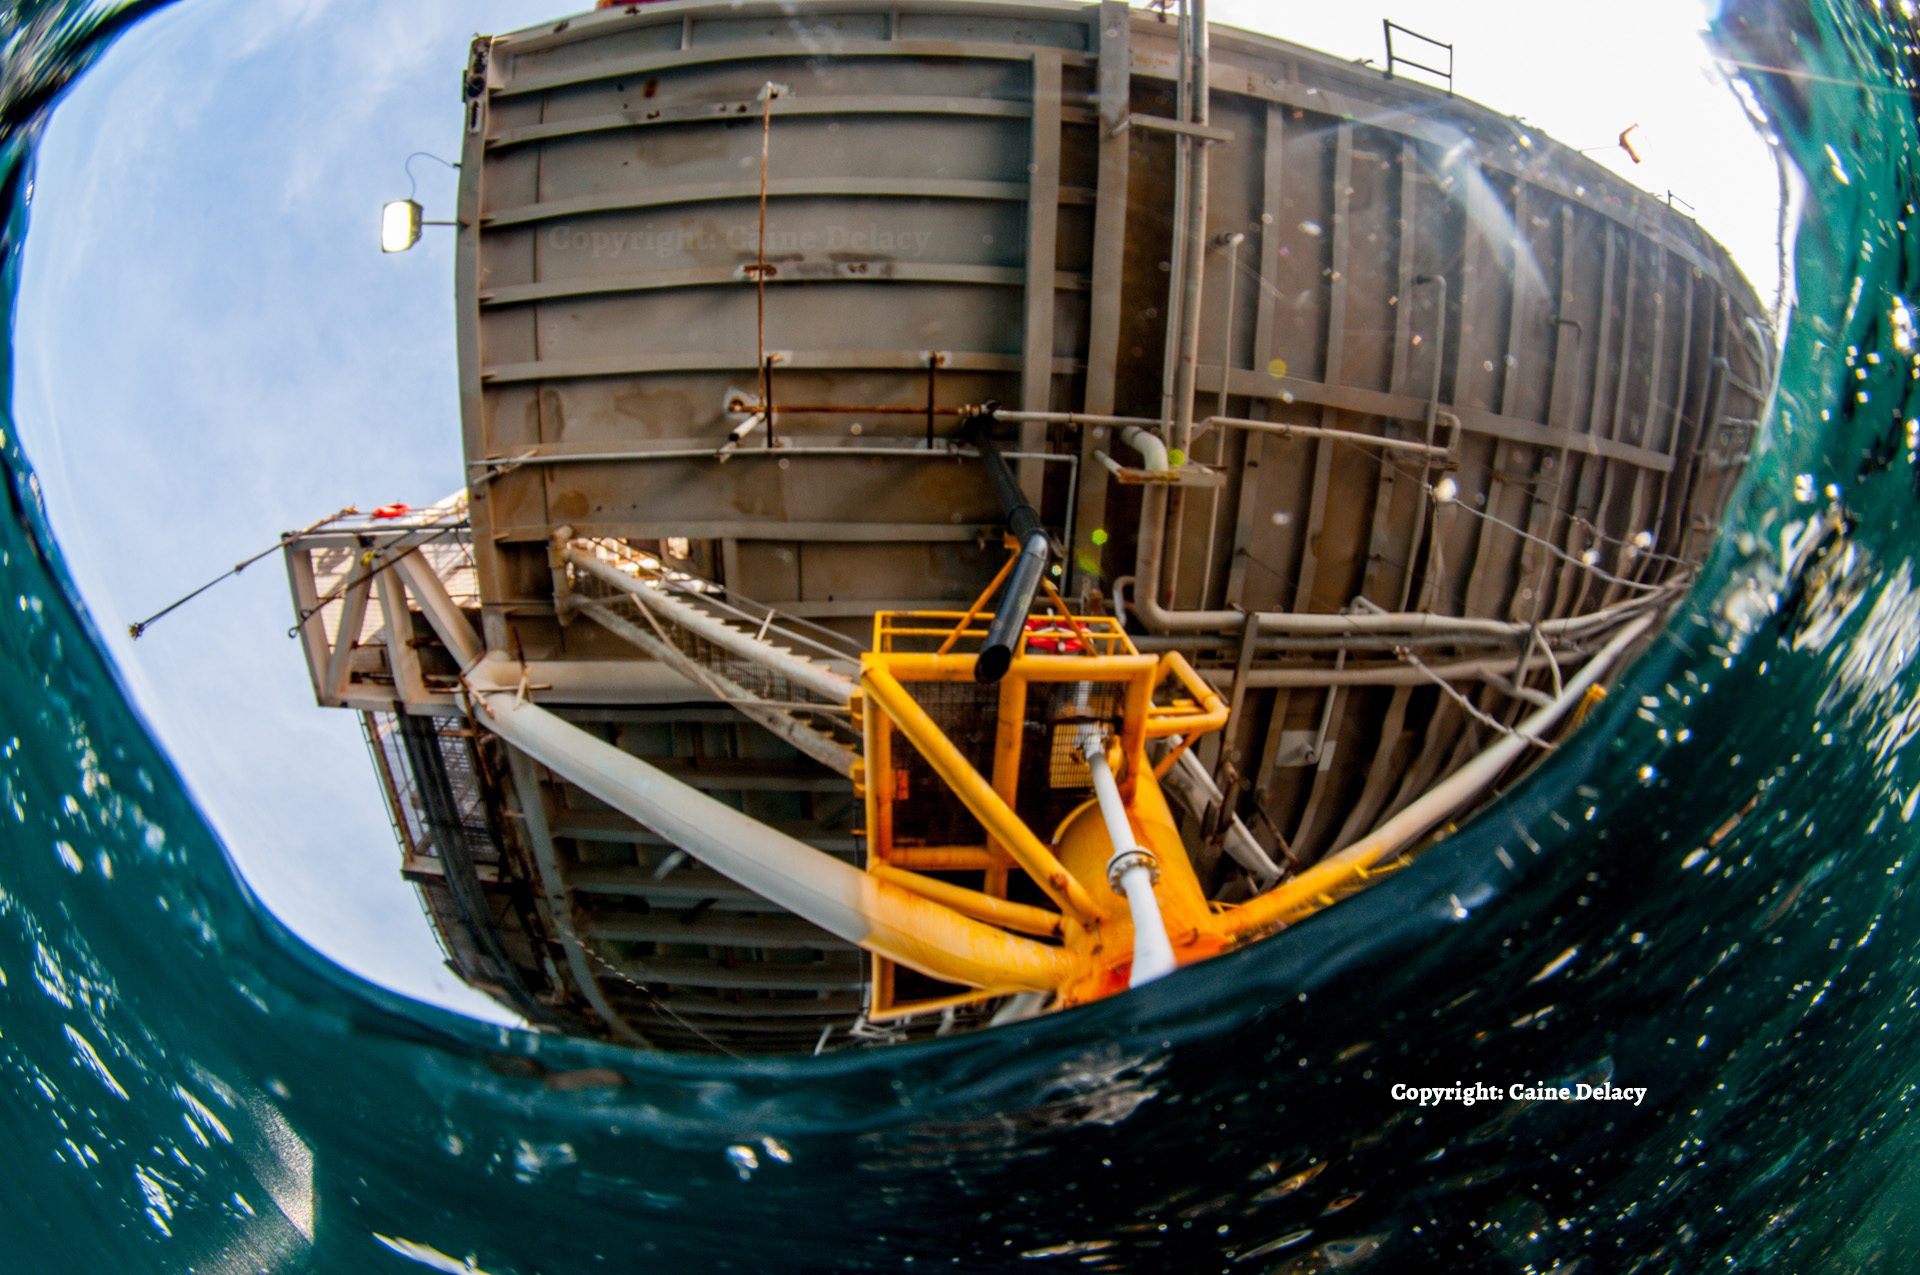 A photo of the underside of an oil rig, taken just beneath the surface of the water